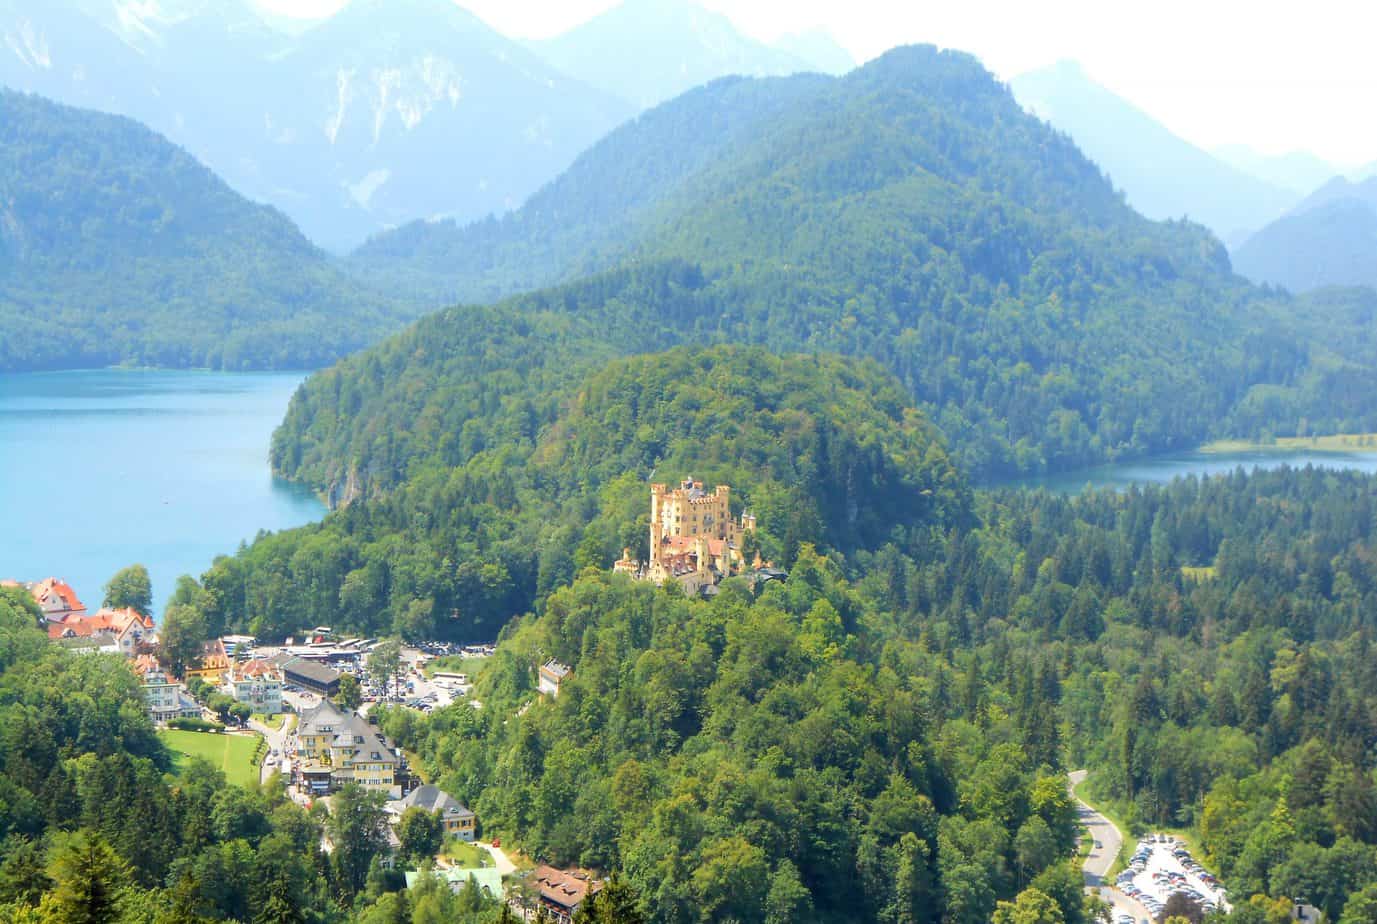 A small yellow castle is seen surrounded by mountains near a town and a lake.